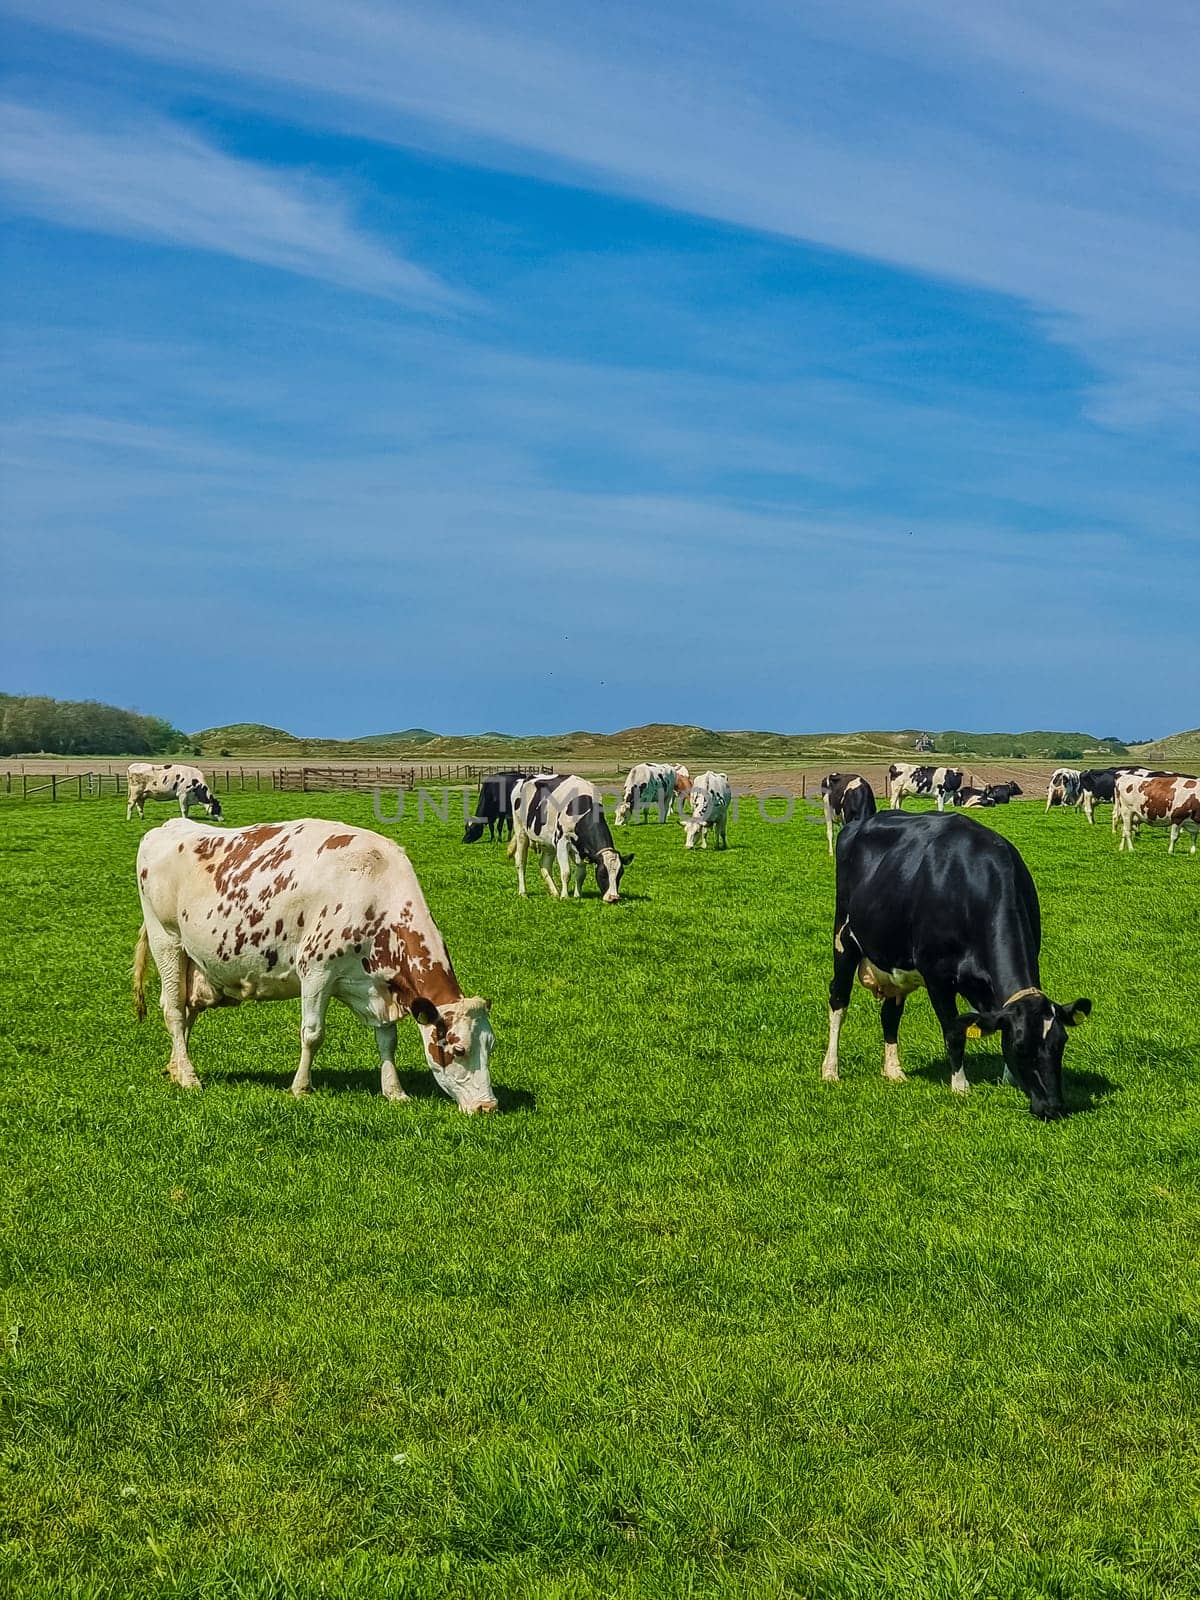 A harmonious scene unfolds as a group of cows peacefully graze on the lush green fields of Texel, Netherlands.